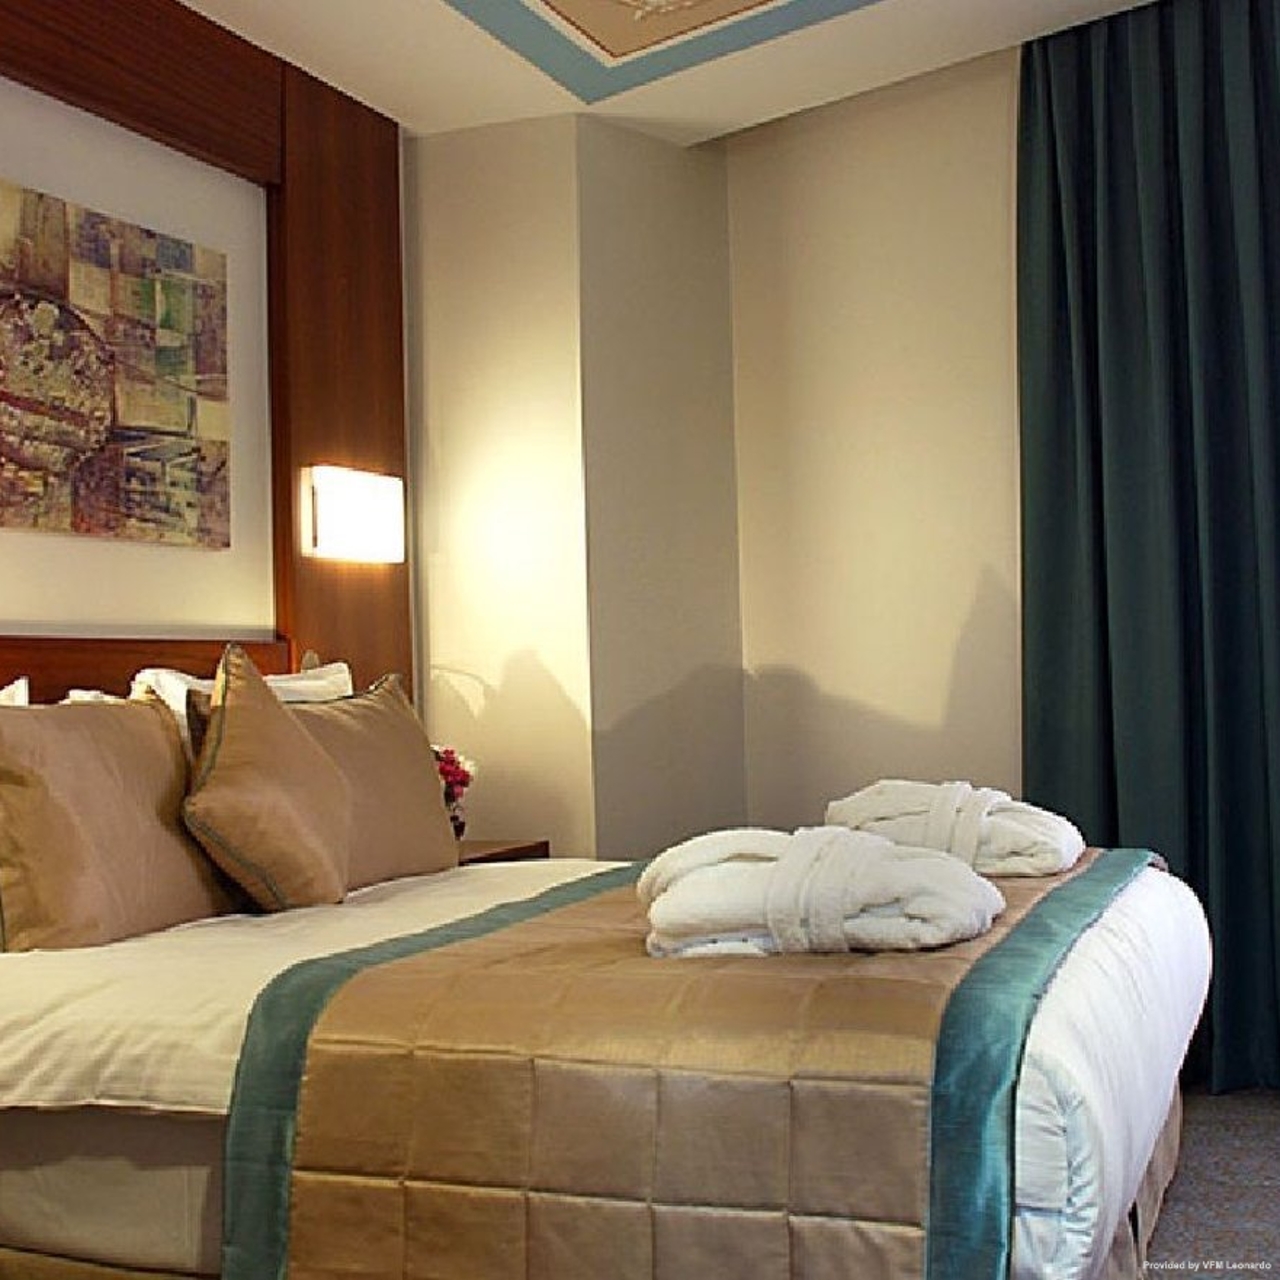 hurry inn istanbul turkey at hrs with free services